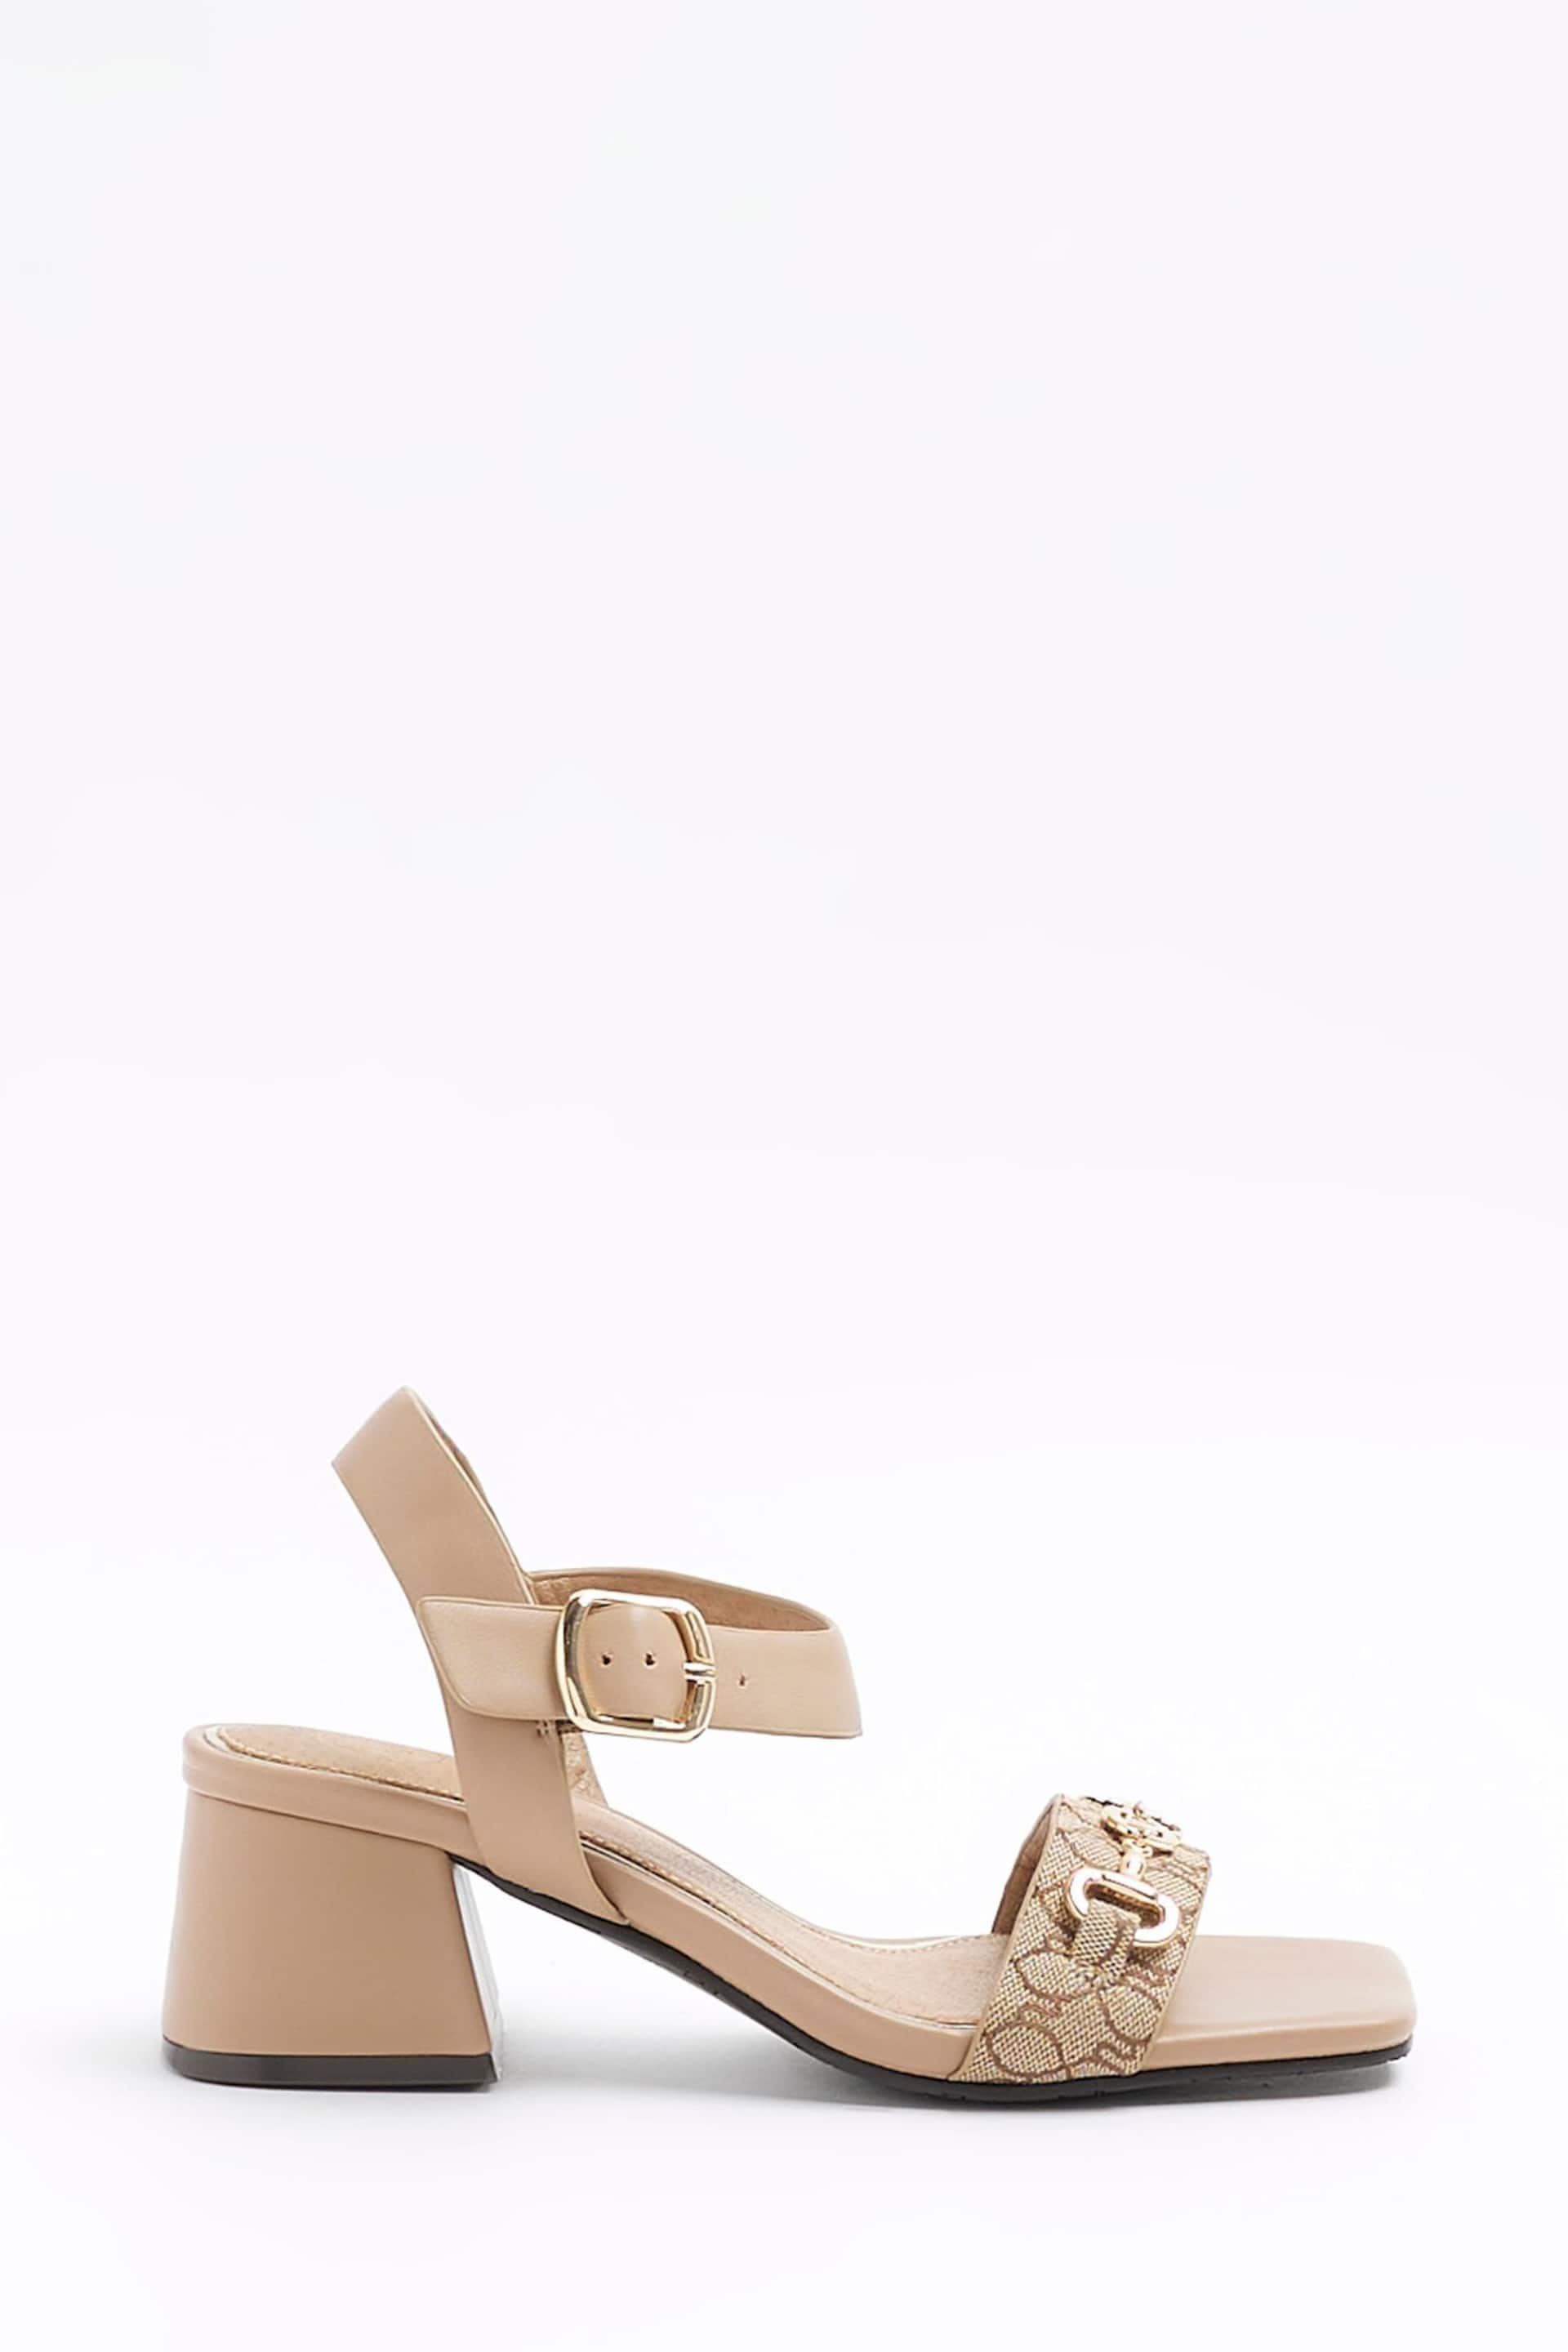 River Island Brown Snaffle Low Block Heeled Sandals - Image 1 of 4